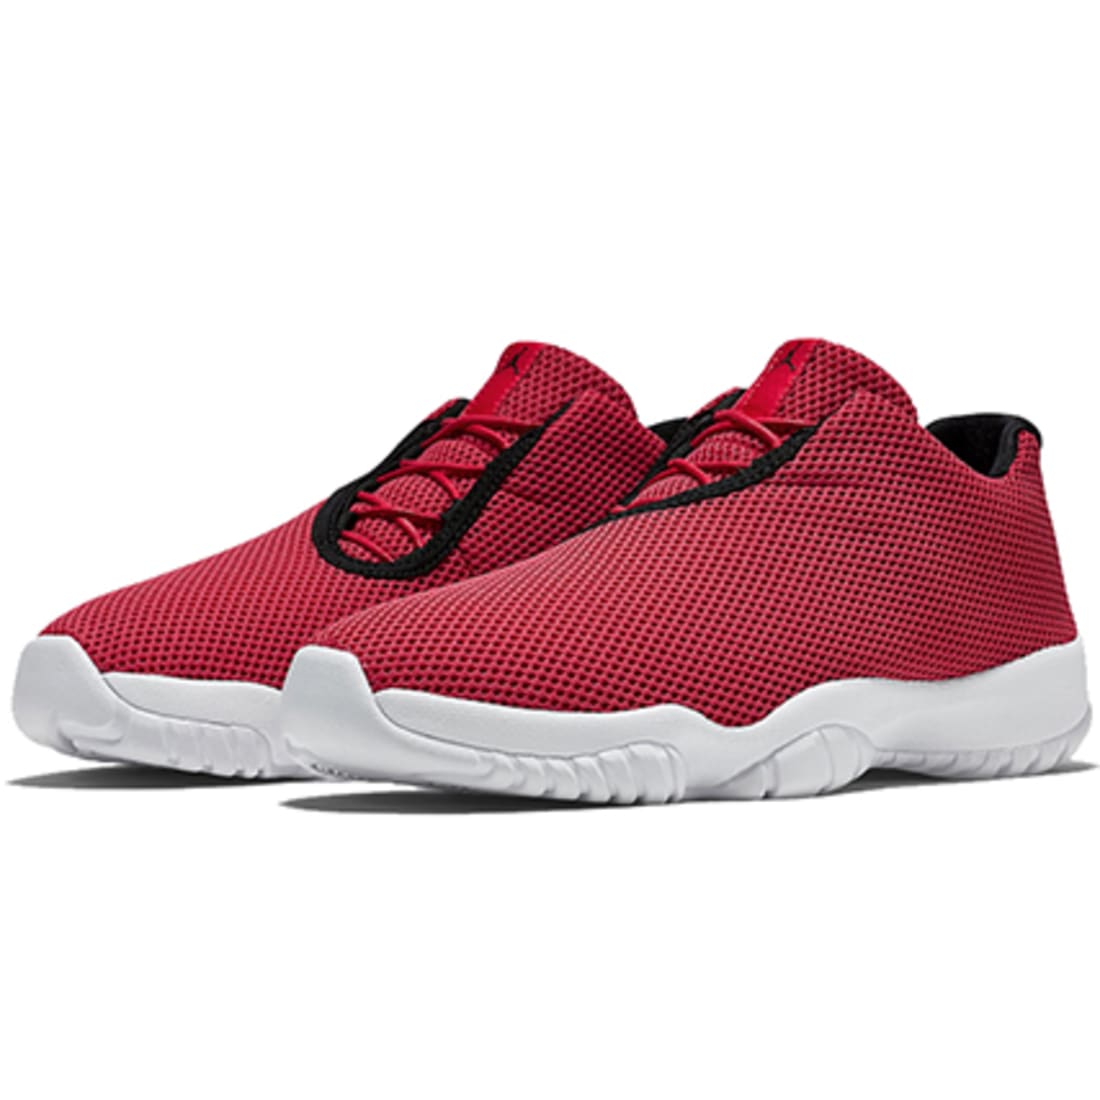 Future low. Air Jordan Future Low. Air Jordan Future. Air Jordan Future женские. Jordan Future Low Red.